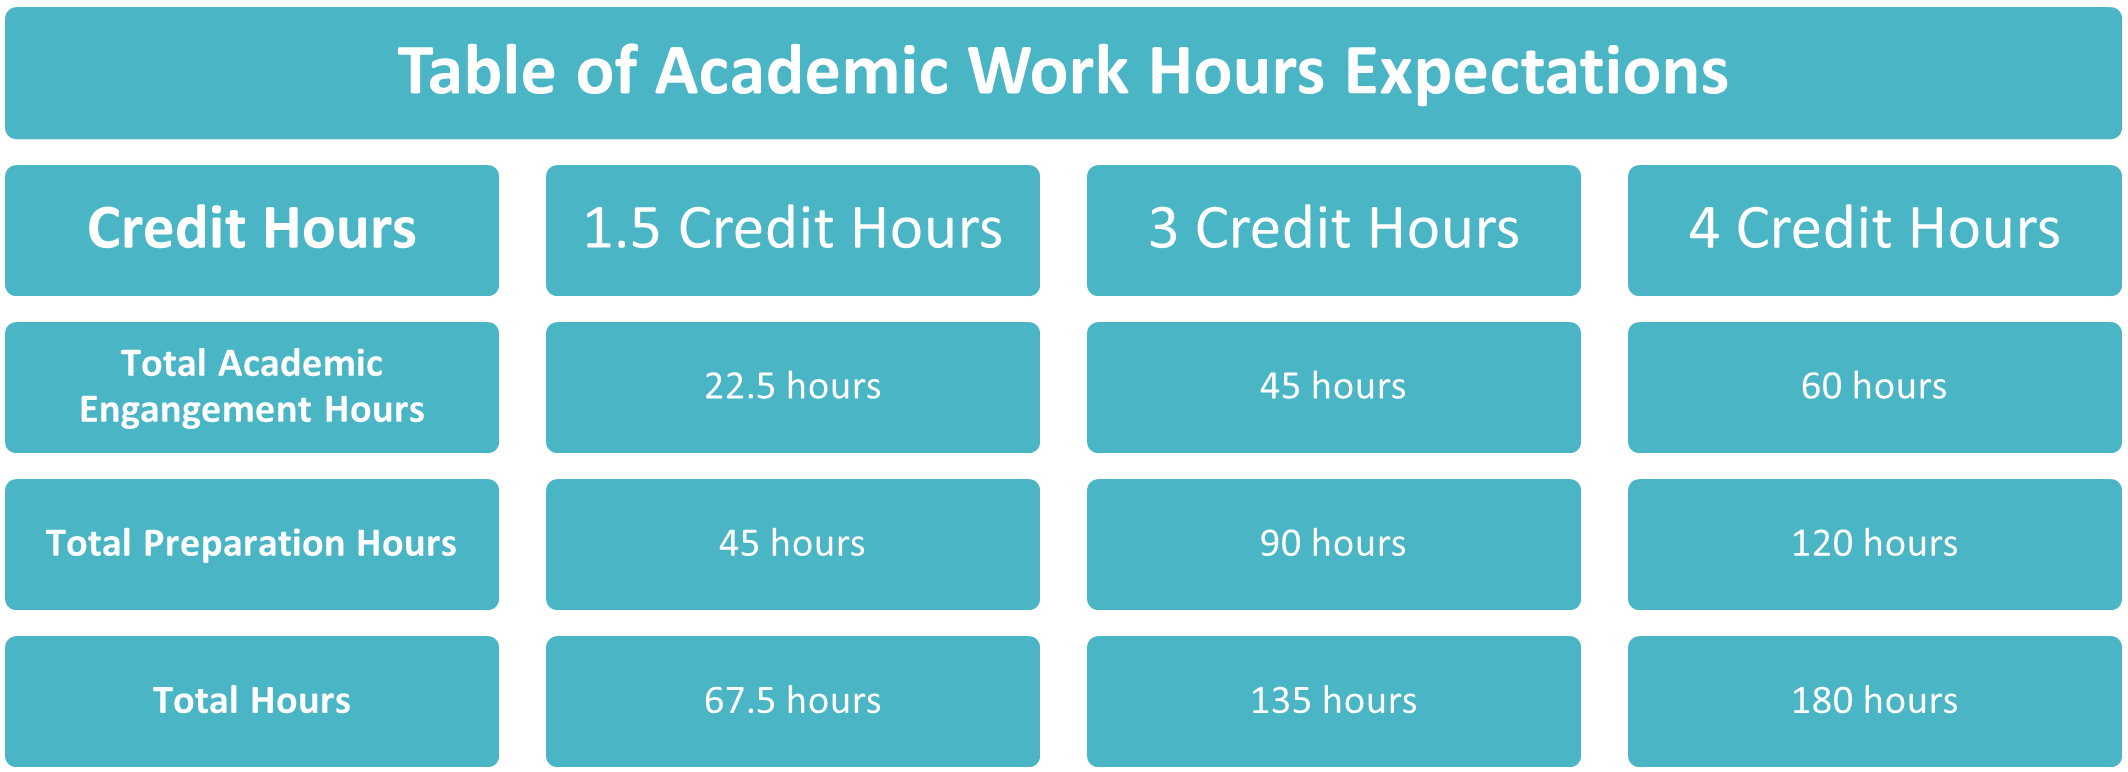 phd thesis credit hours